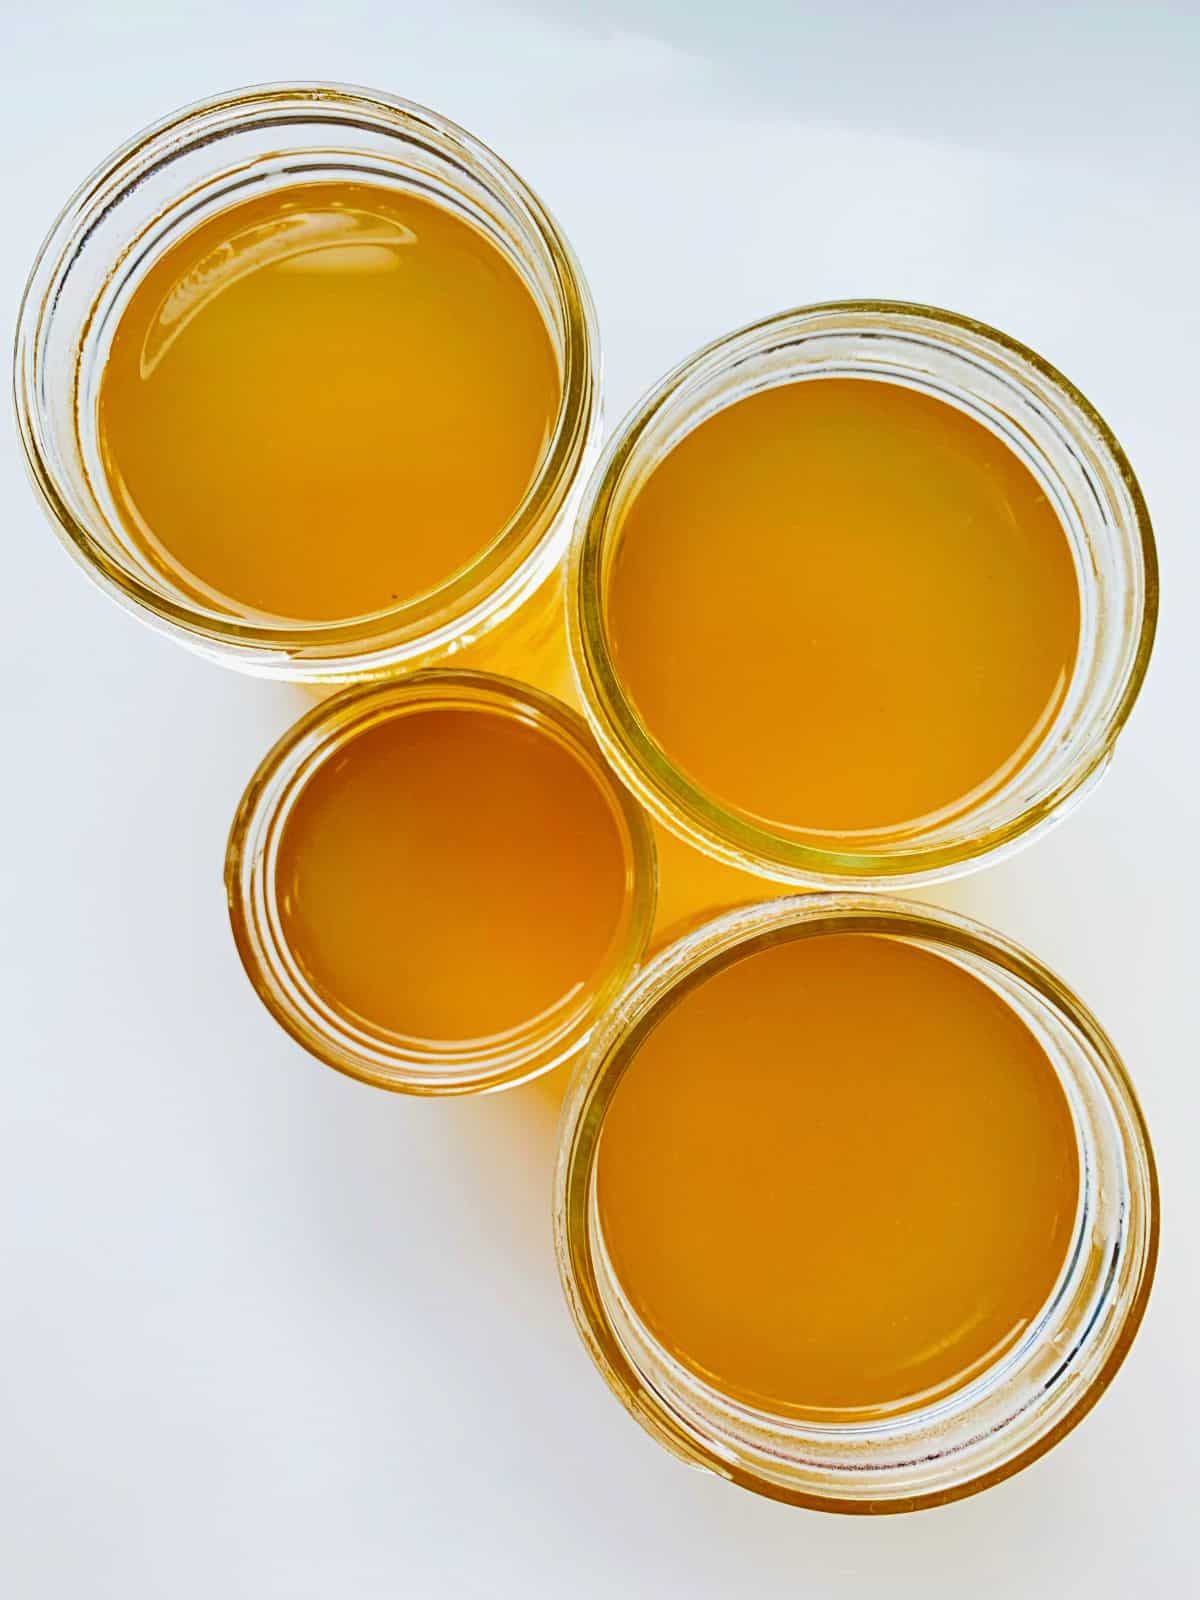 An image of four glass jars, as seen from above, filled with strained Corn Broth.